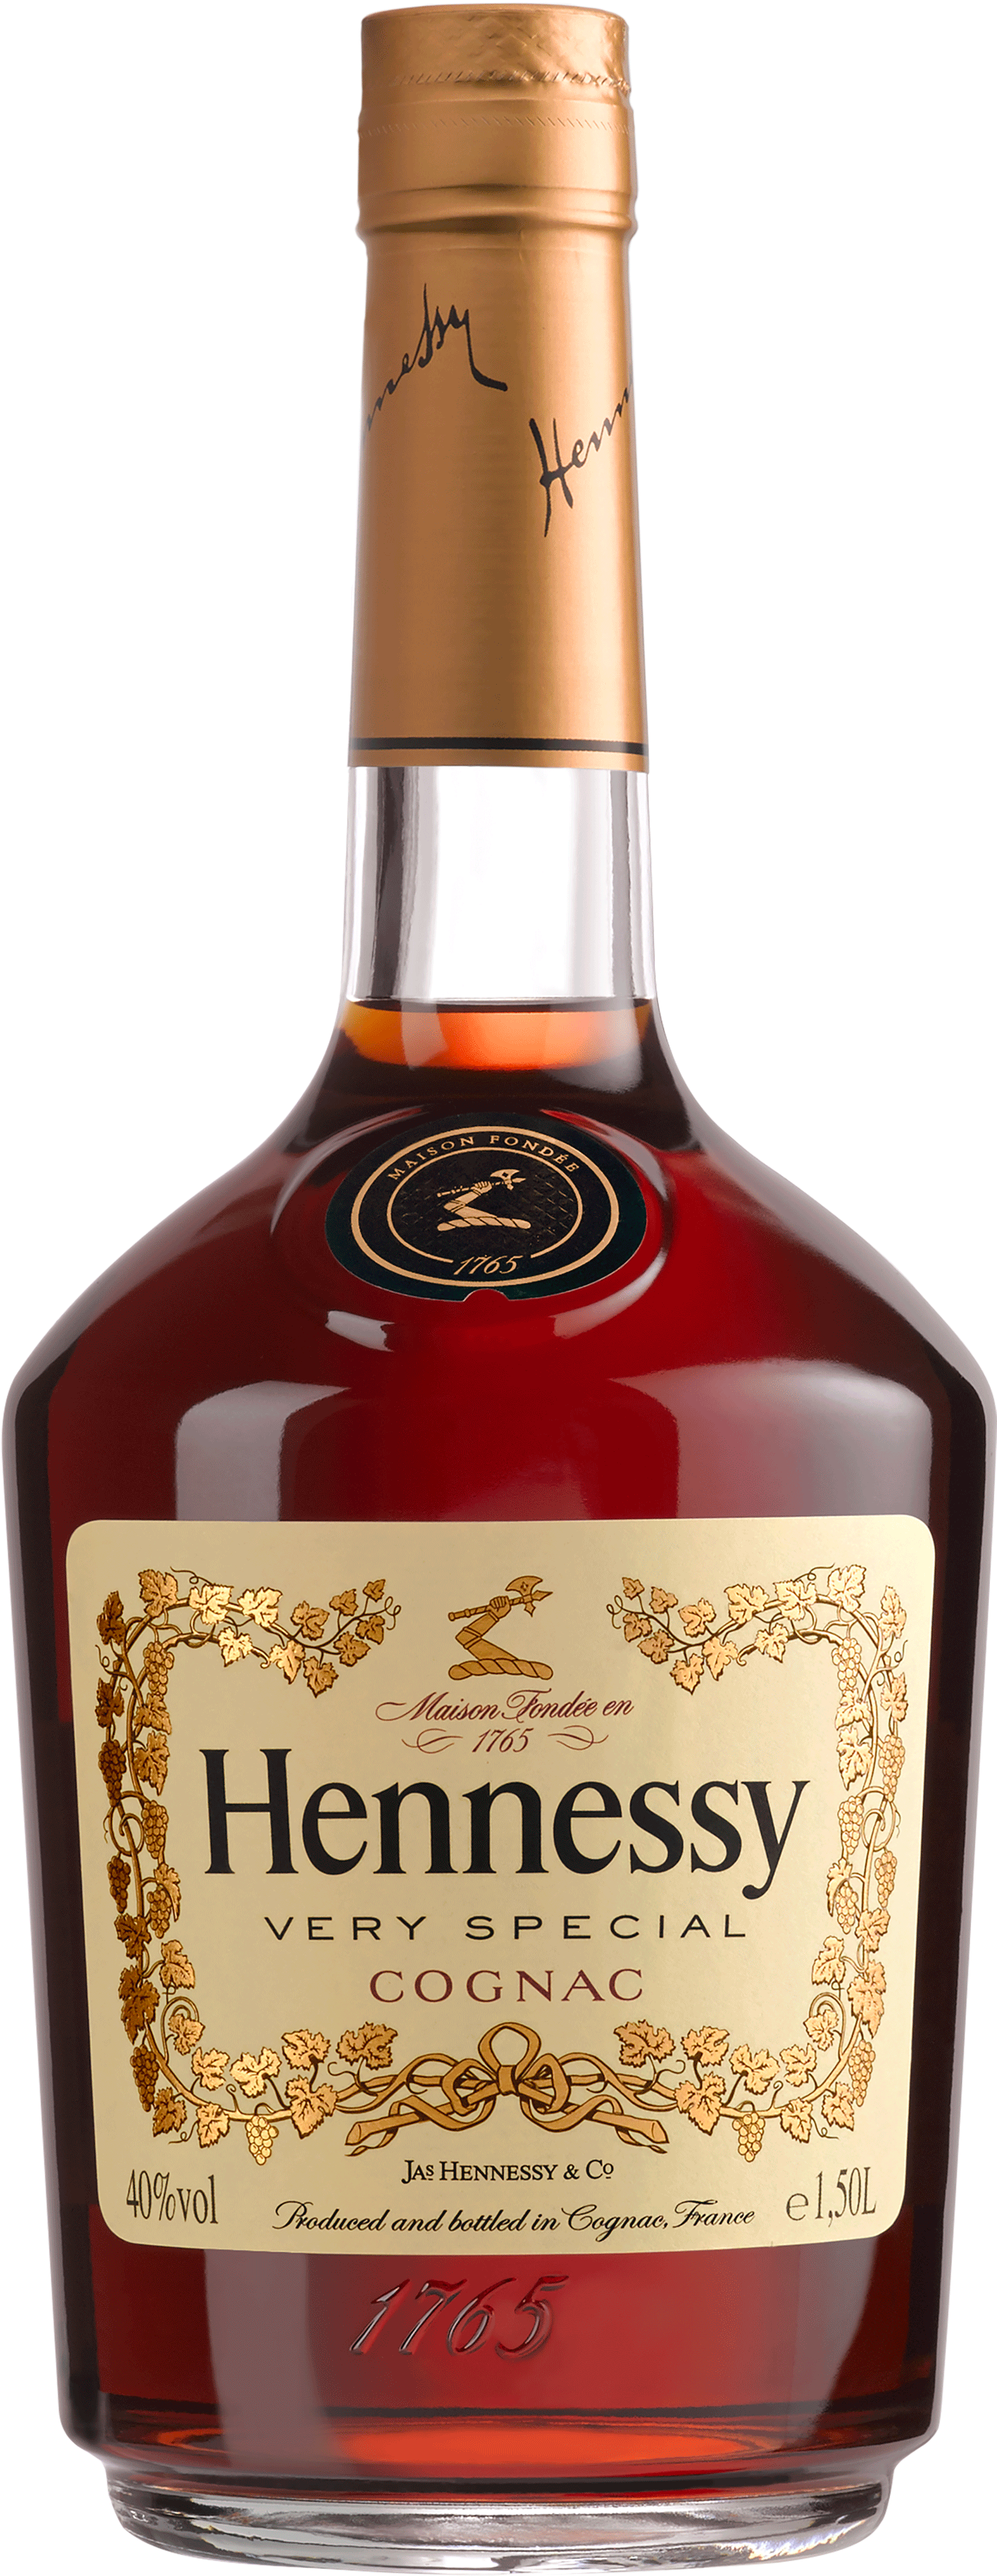 Download Hennessy Vector Henny Bottle Png Image With No Background Pngkey Com